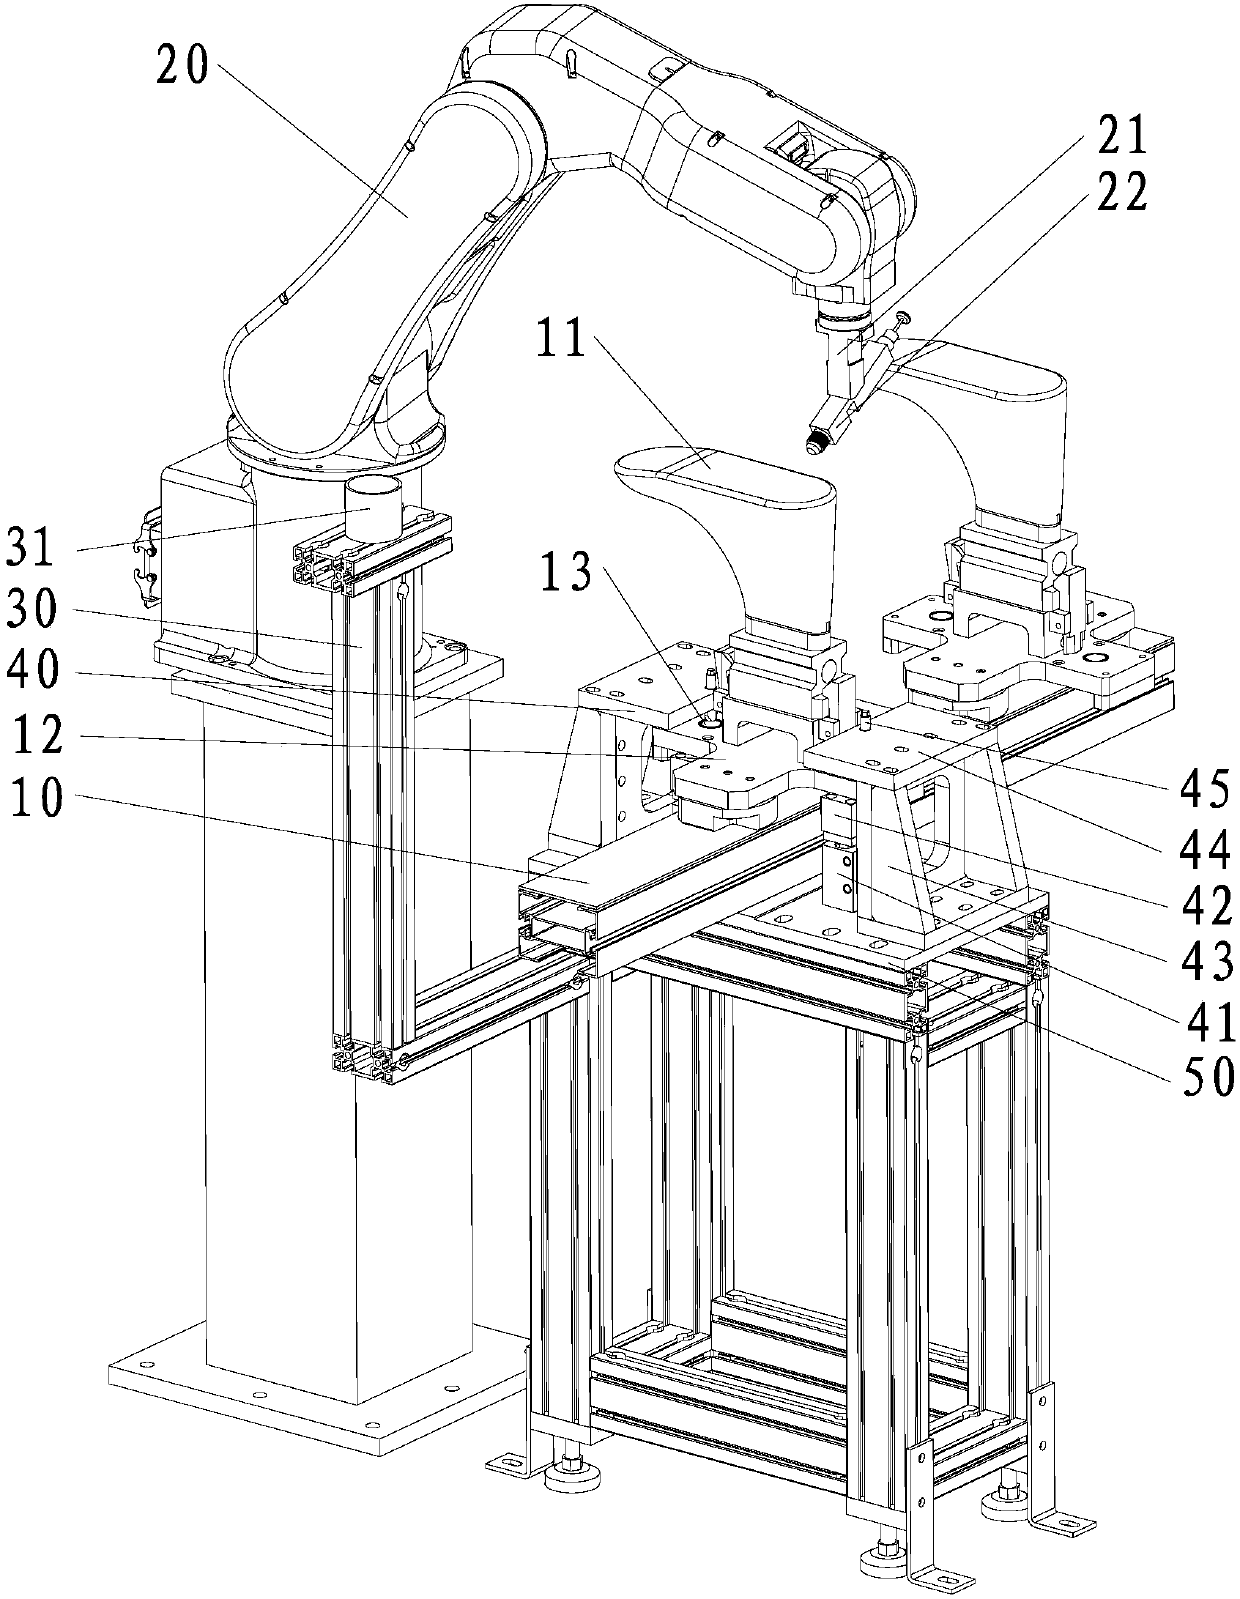 Device for spraying adhesive to shoe vamp